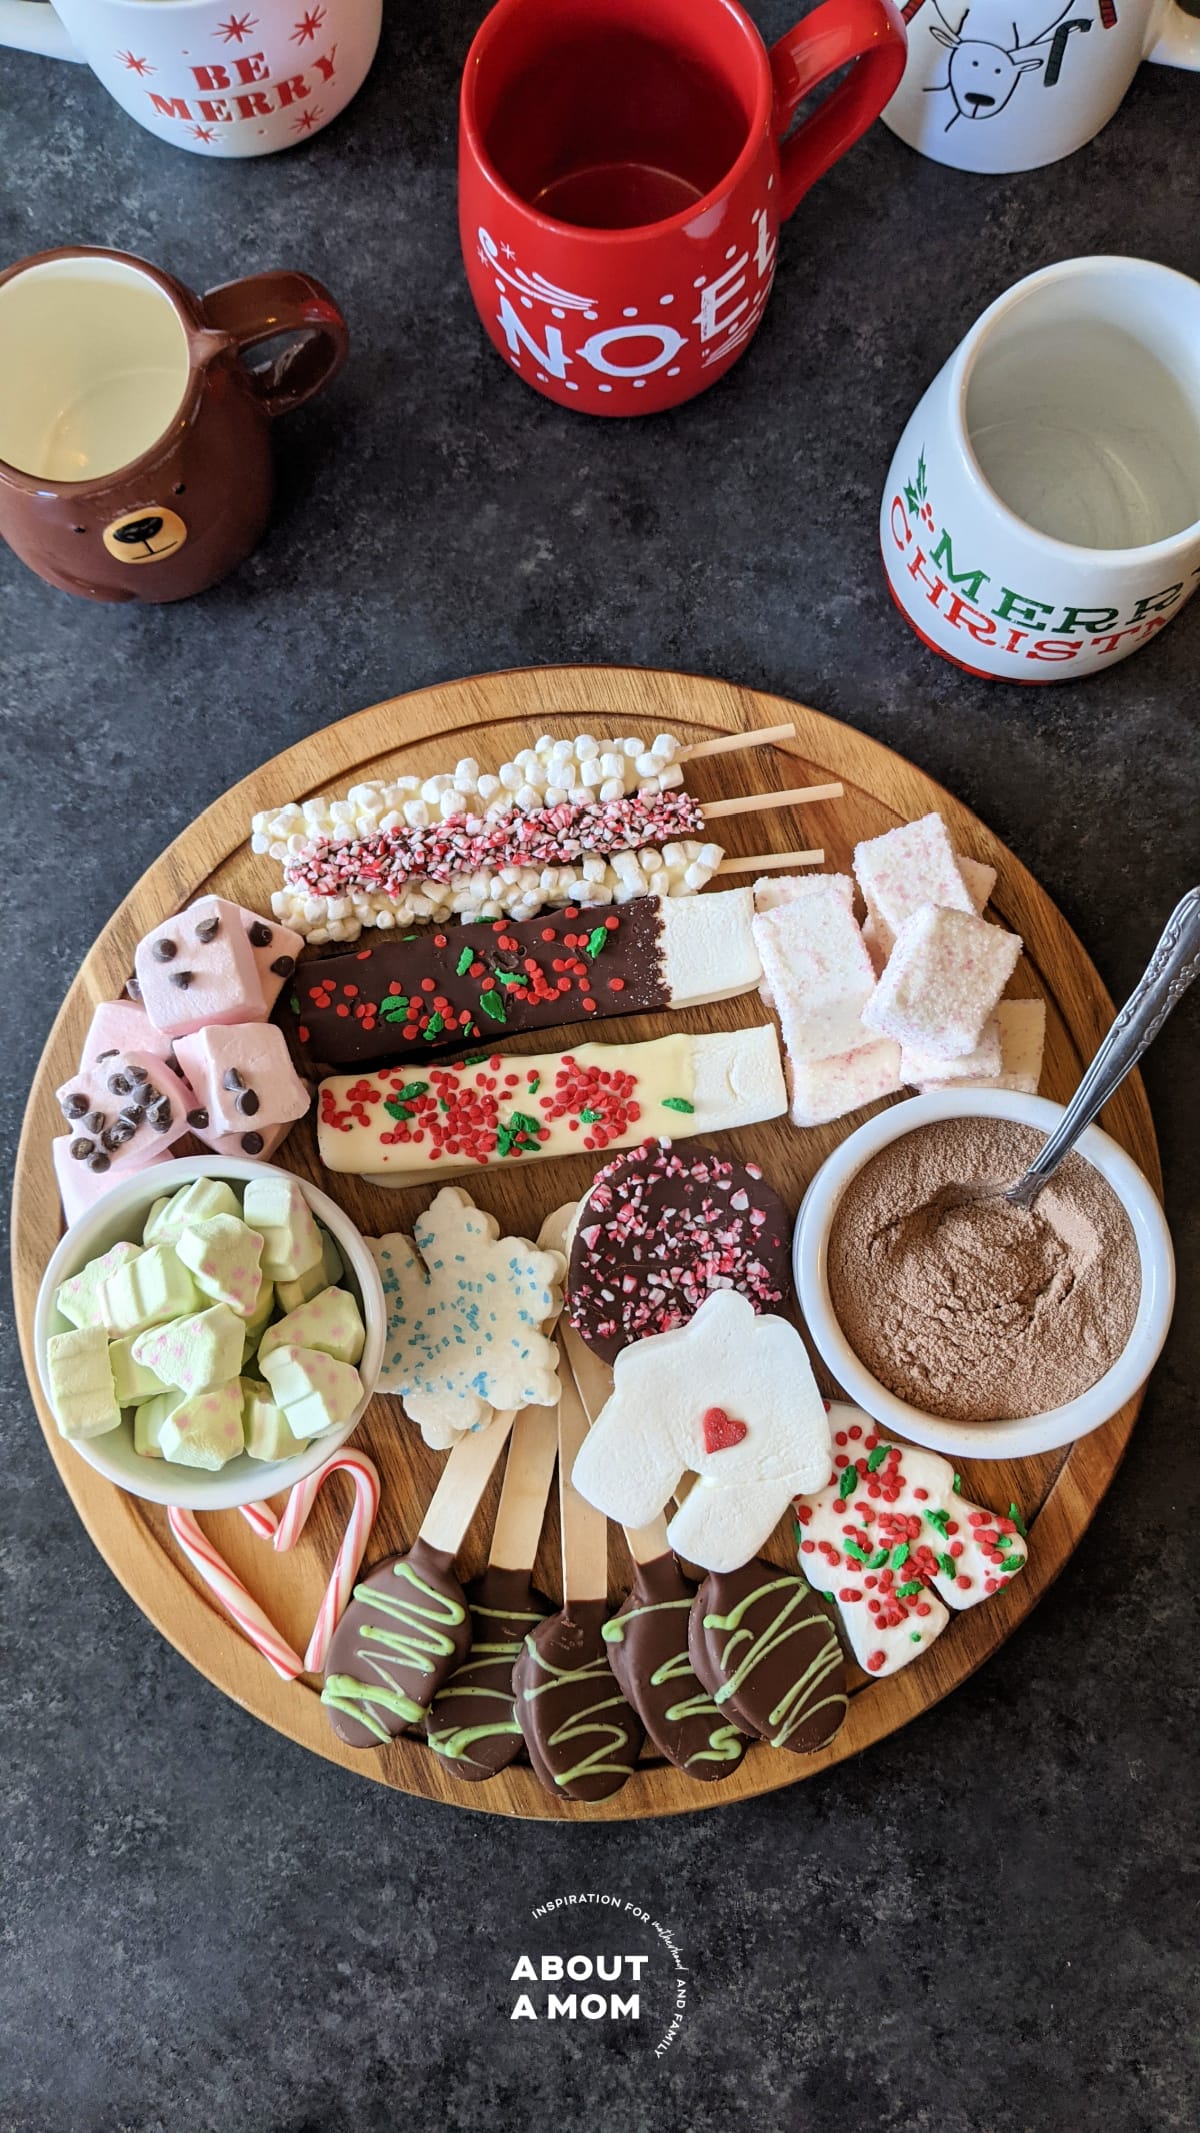 Tis the season for hot cocoa, so I have some hot cocoa board inspiration to share with you. Hot cocoa boards make winter gatherings more festive. This hot chocolate board is loaded up with lots of marshmallows, stir sticks, and the very best homemade hot cocoa mix.